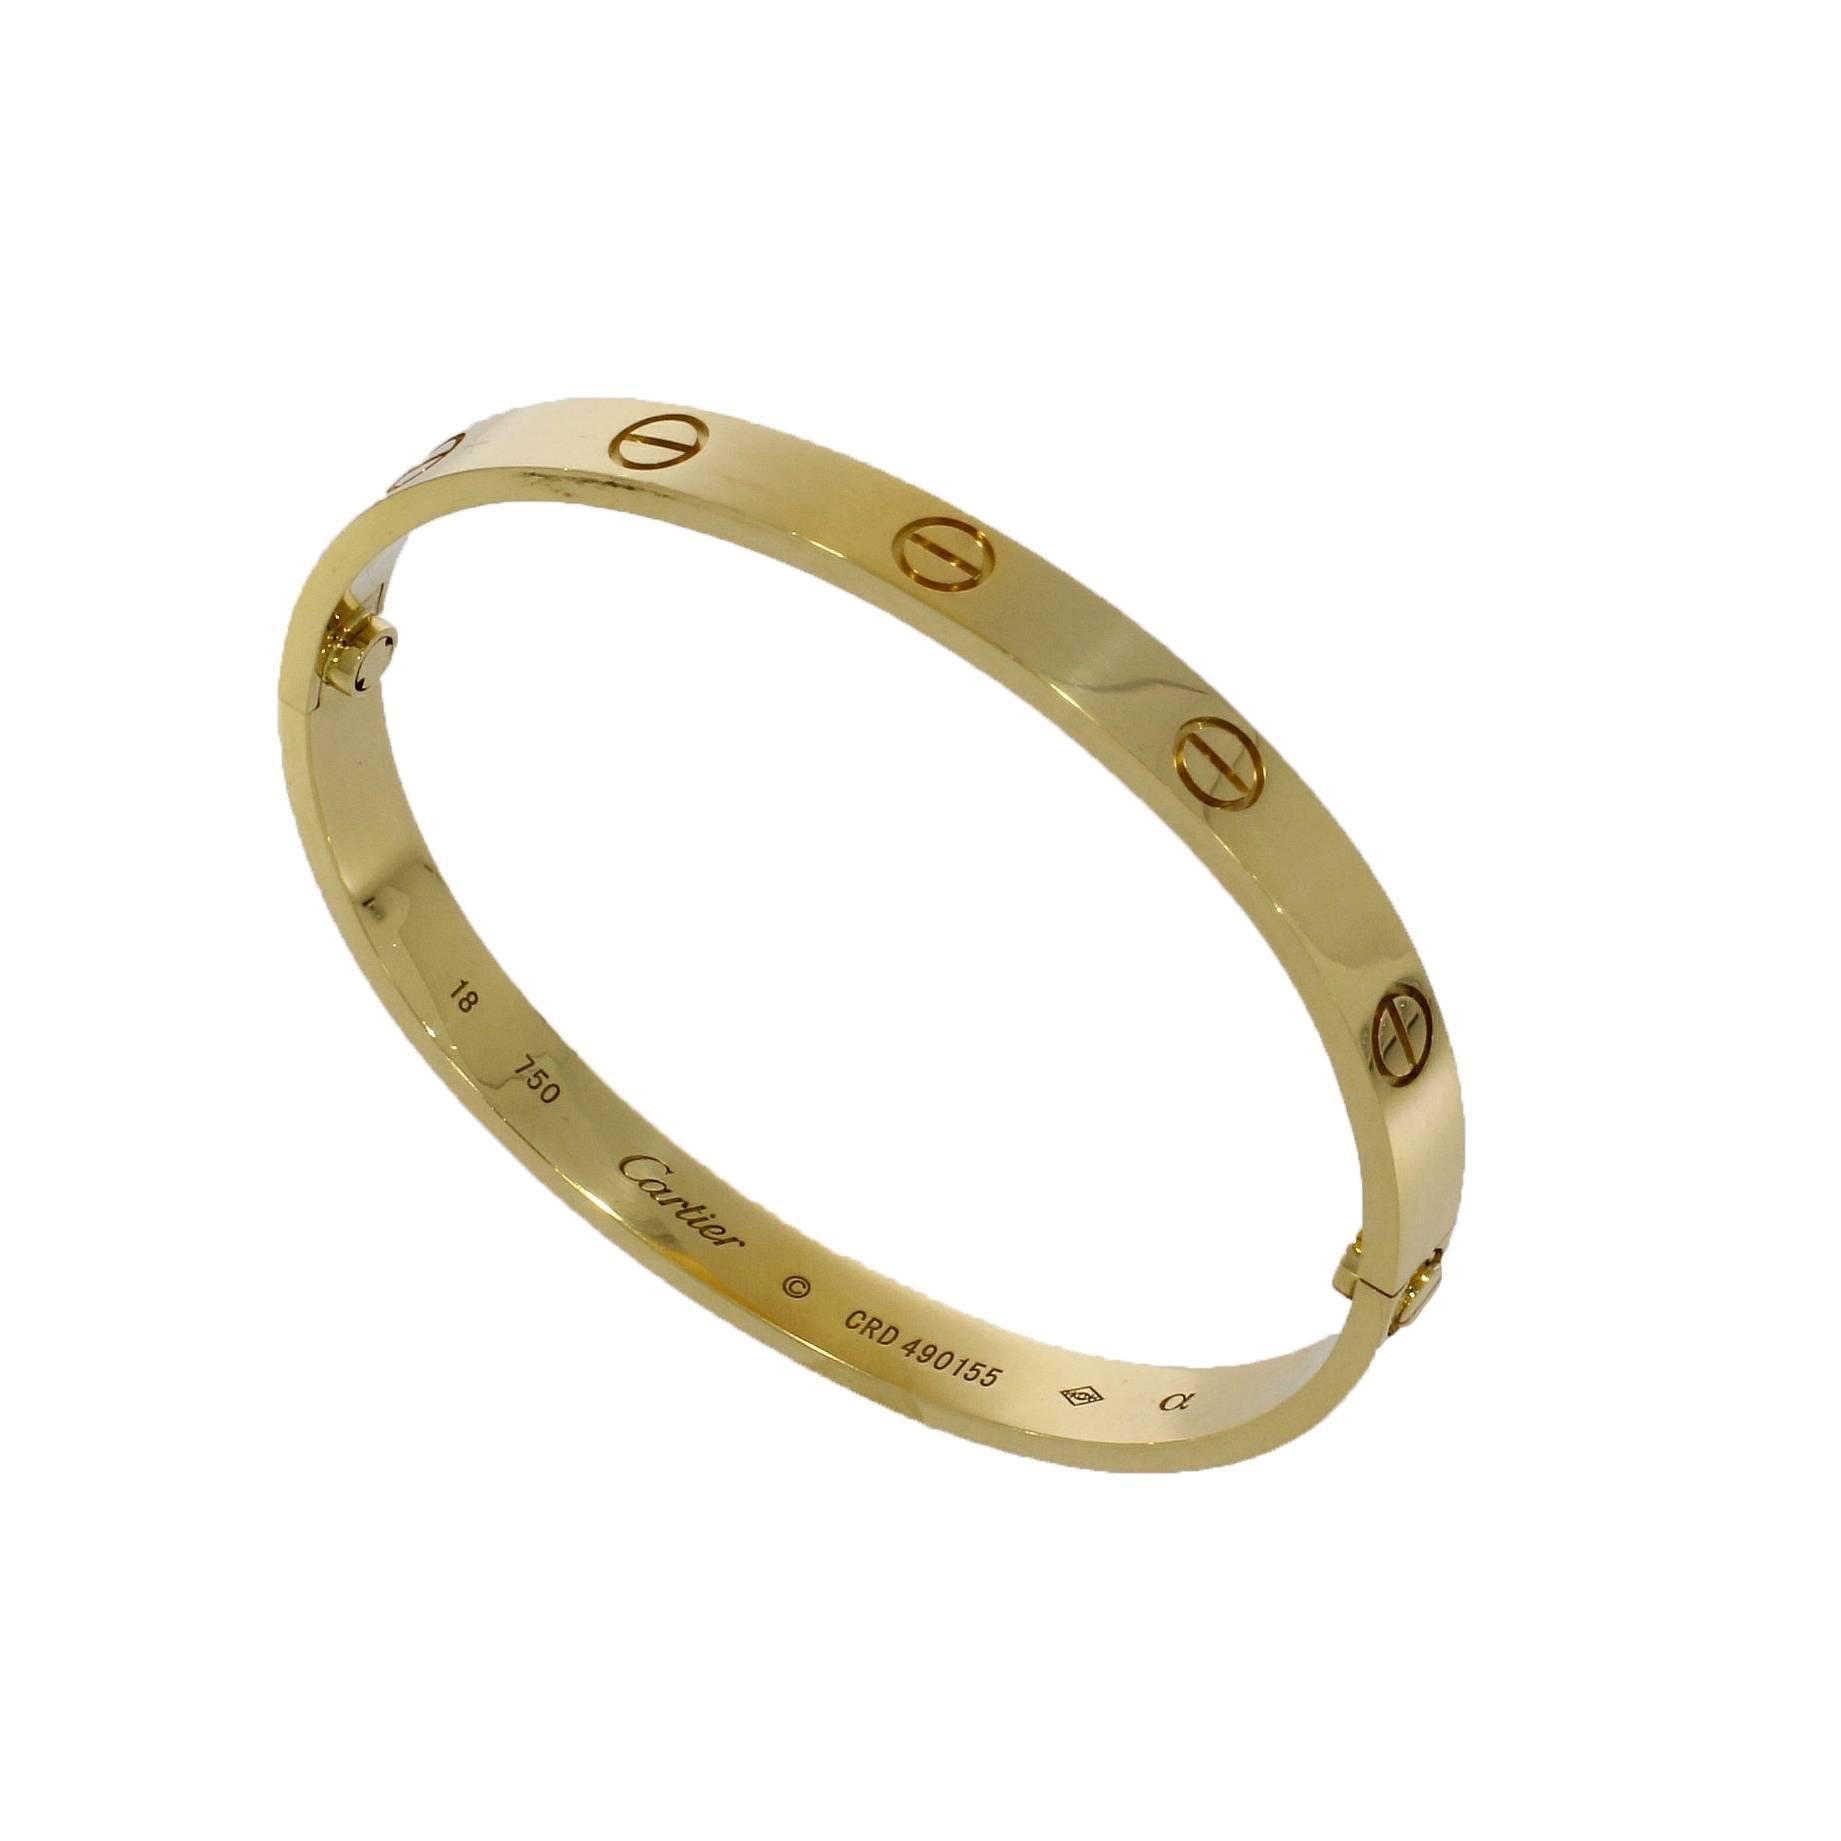 This Cartier Bangle has undergone a thorough inspection to ensure all aspects of the piece are as they should be to meet our high standards for sale. It has also been referenced against records and registers to help determine a clean history and its